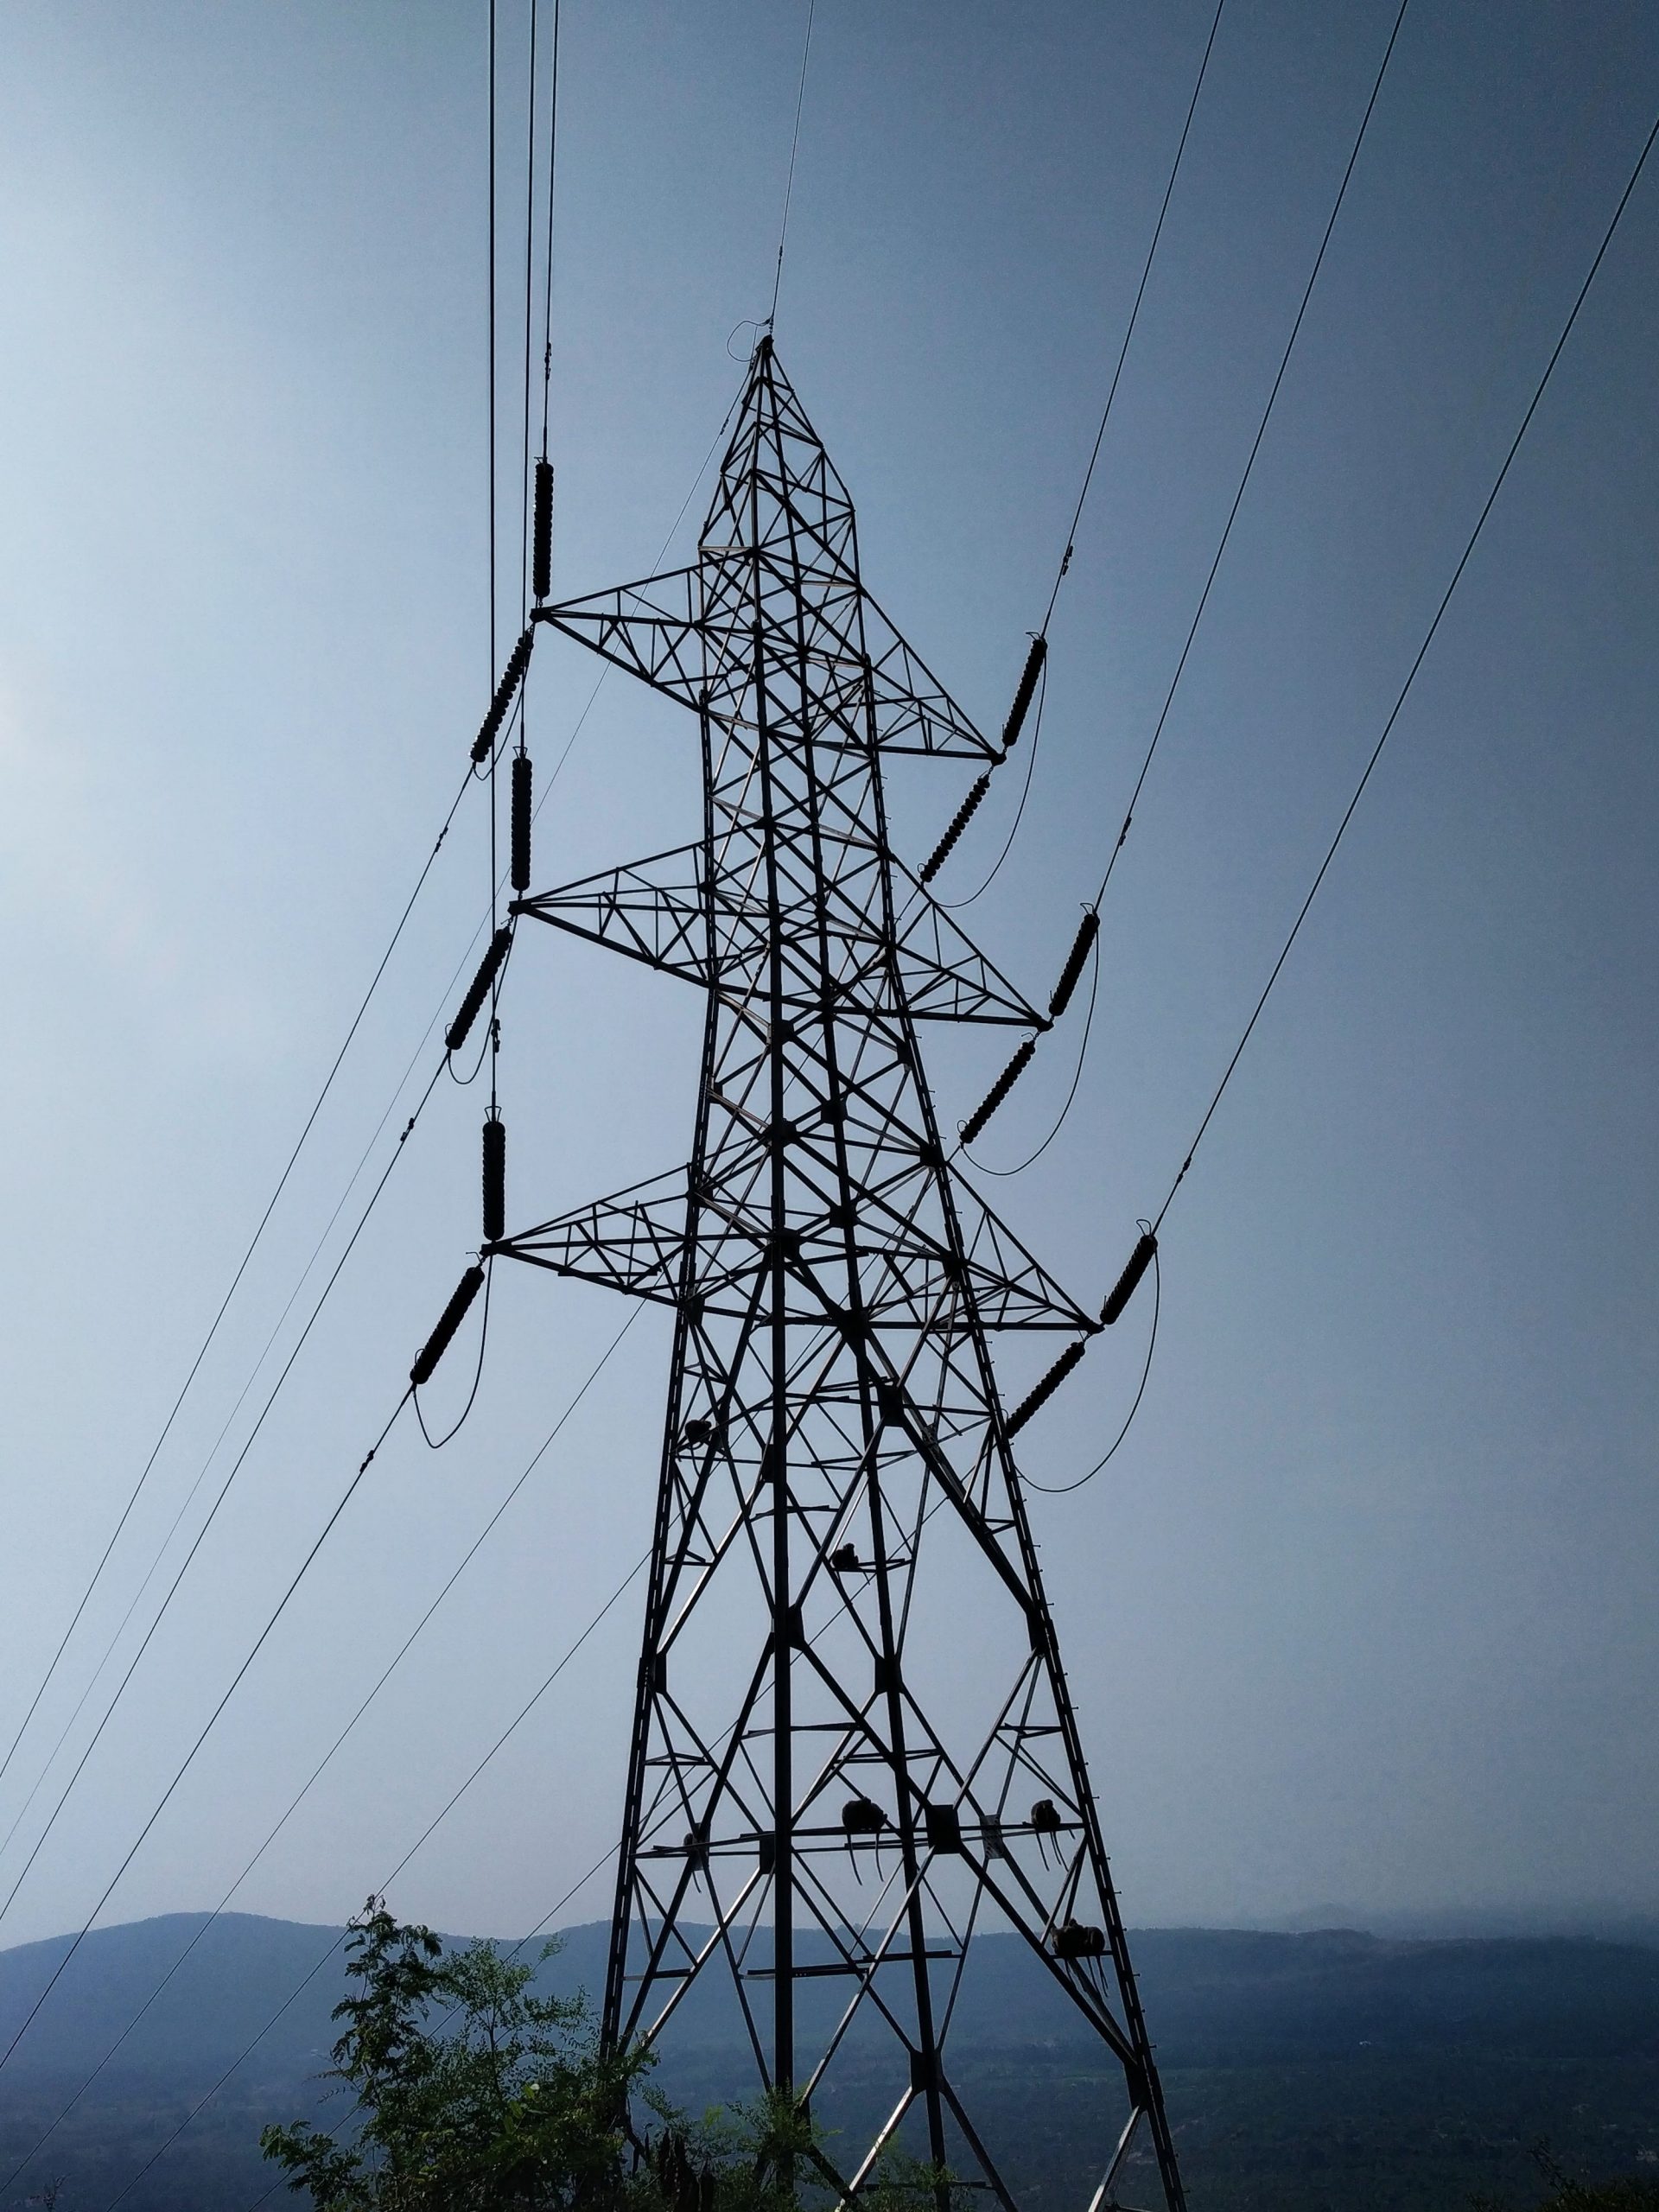 A transmission tower